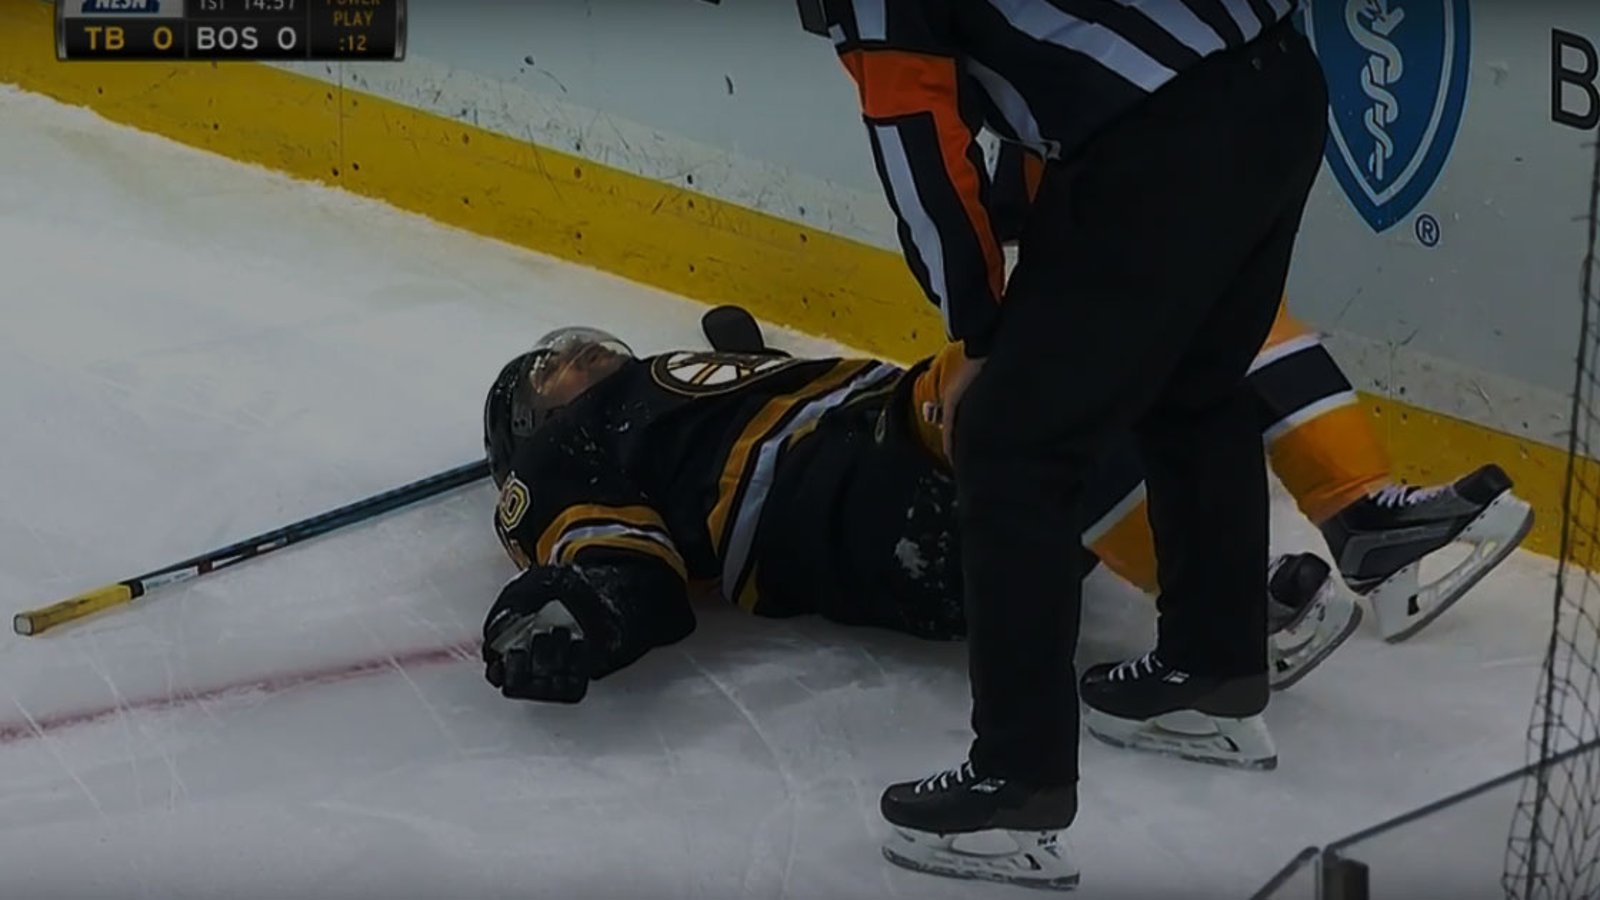 Video: Bruins' player helped off the ice!